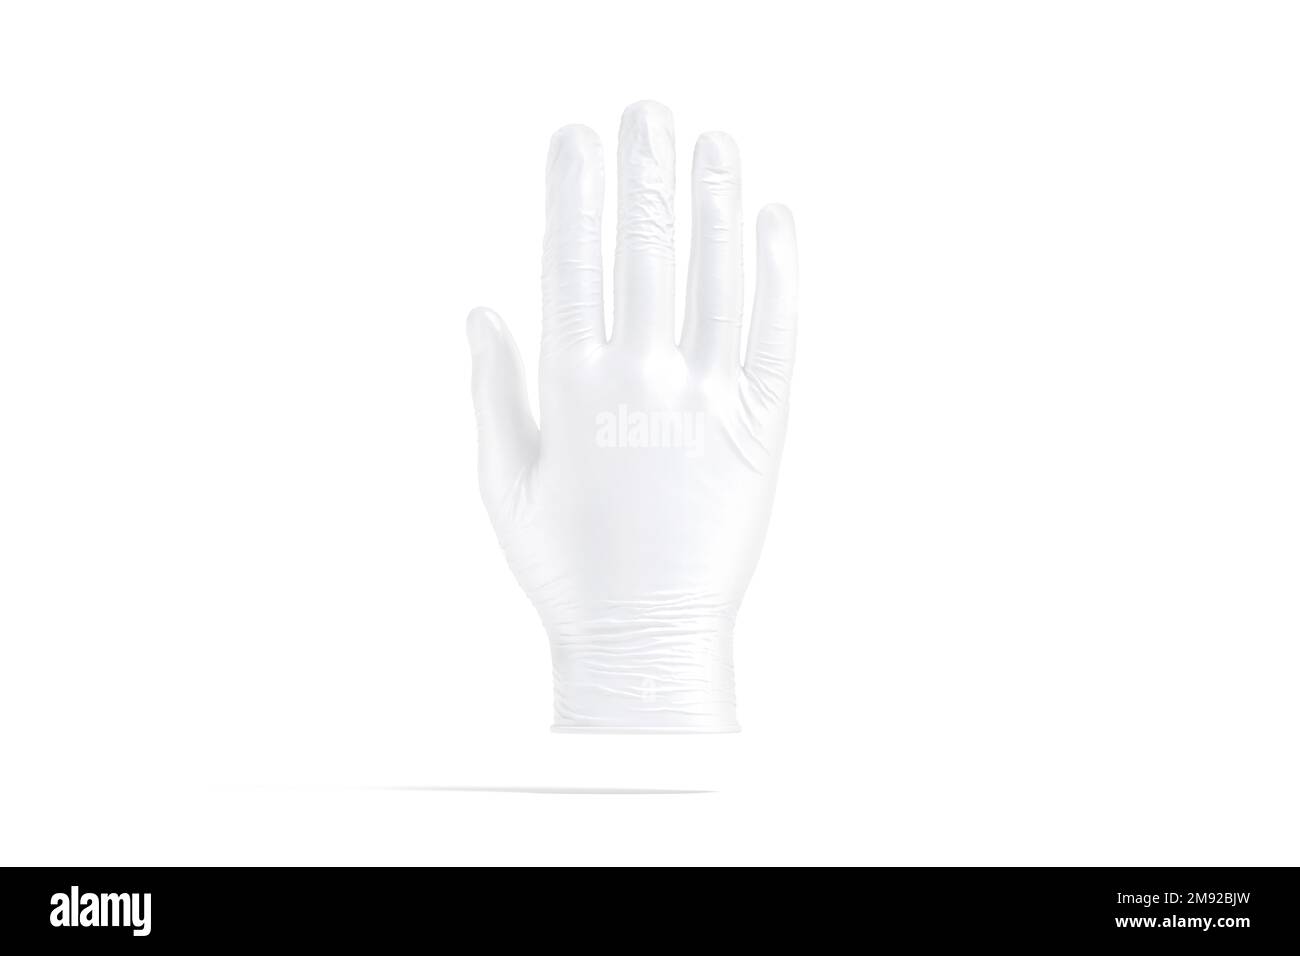 Blank white rubber gloves mockup, front view Stock Photo - Alamy